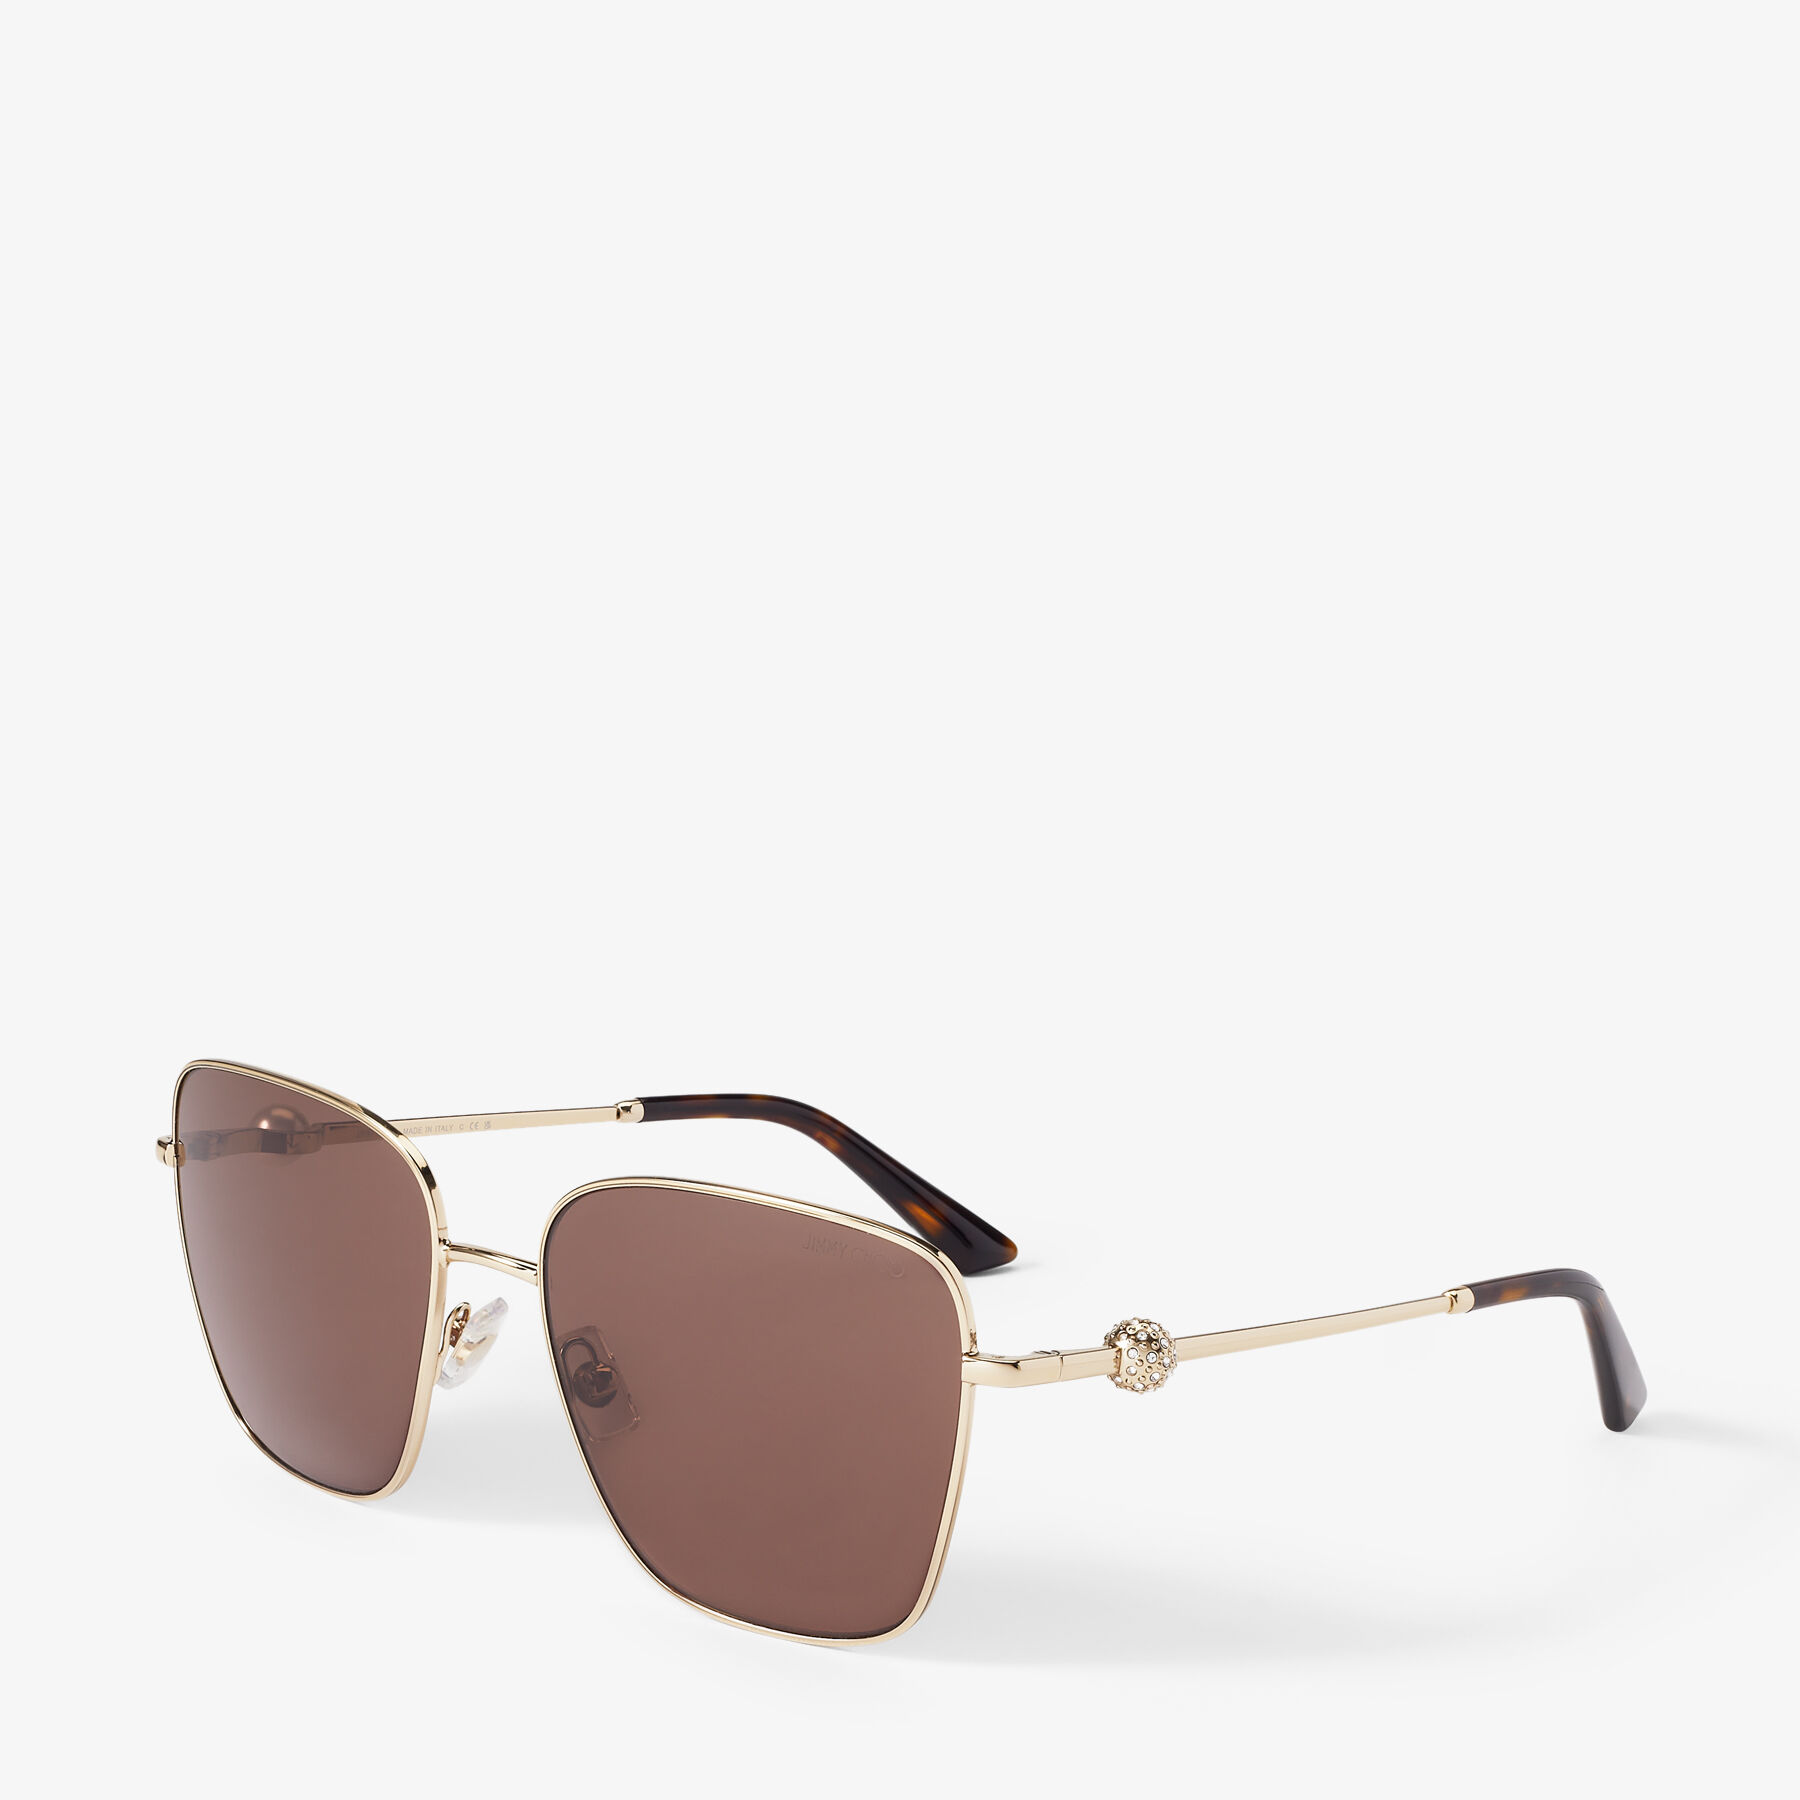 Pua | Pale Gold Square Sunglasses with Crystals | JIMMY CHOO